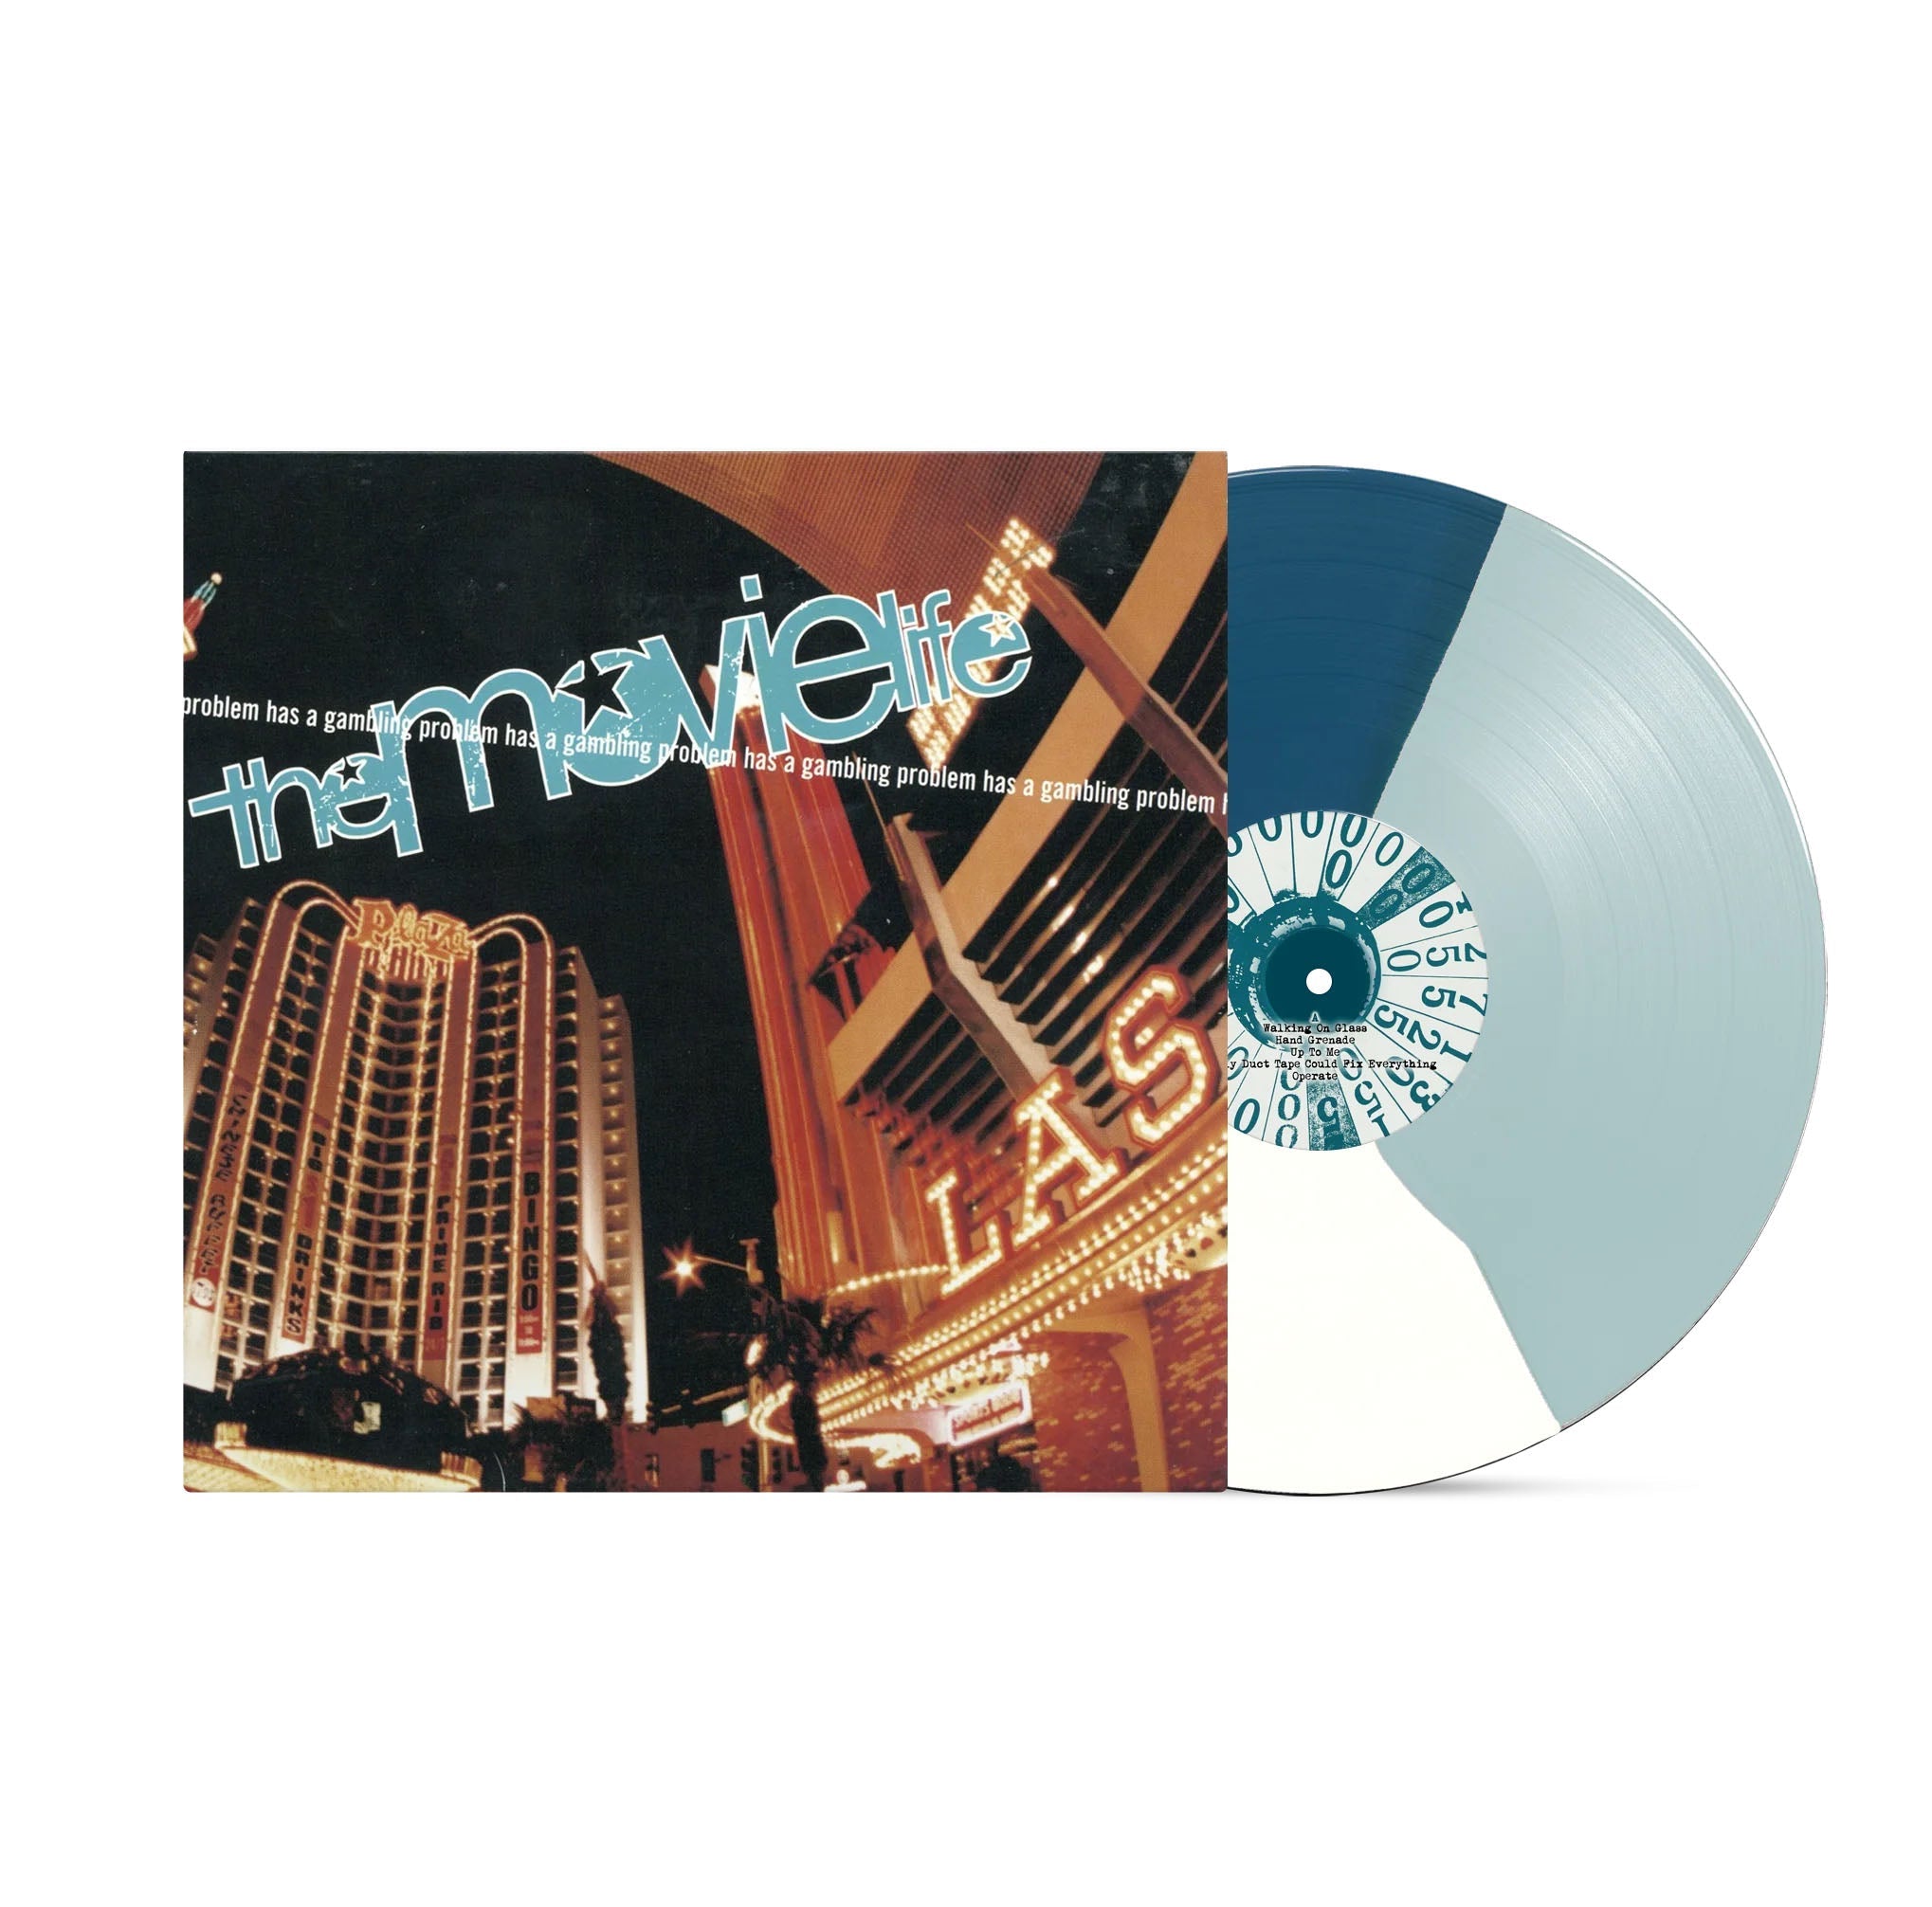 The Movielife: Has a Gambling Problem: 3 - Color Segment Vinyl EP - Steadfast Records